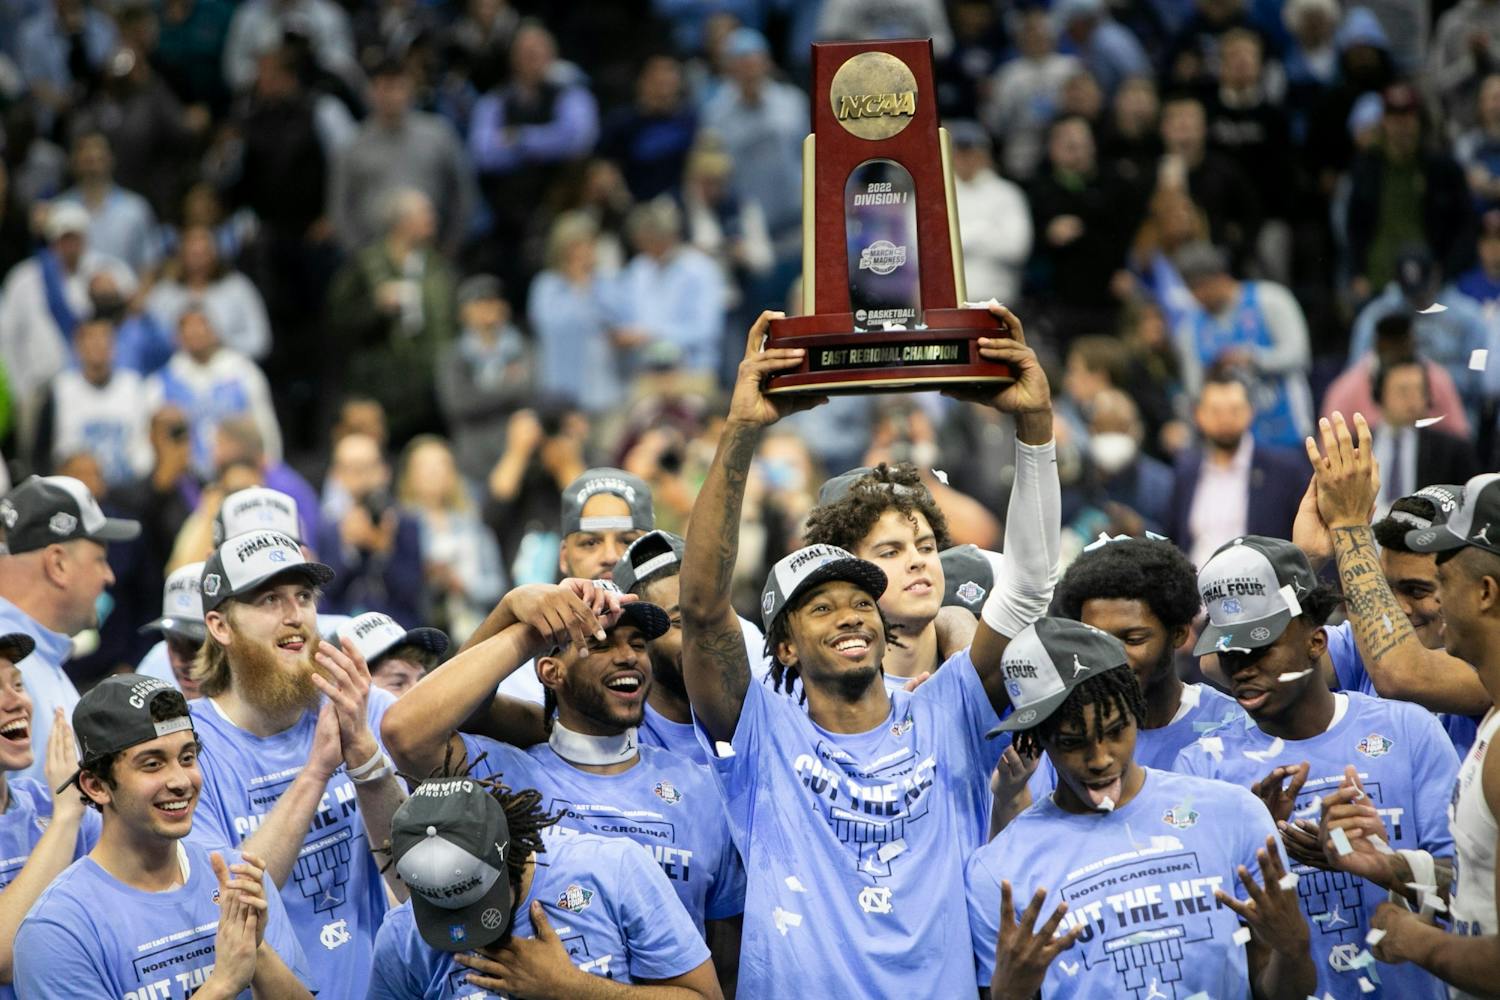 Gallery: North Carolina Basketball advances to Final Four, defeats St. Peter's 69-49